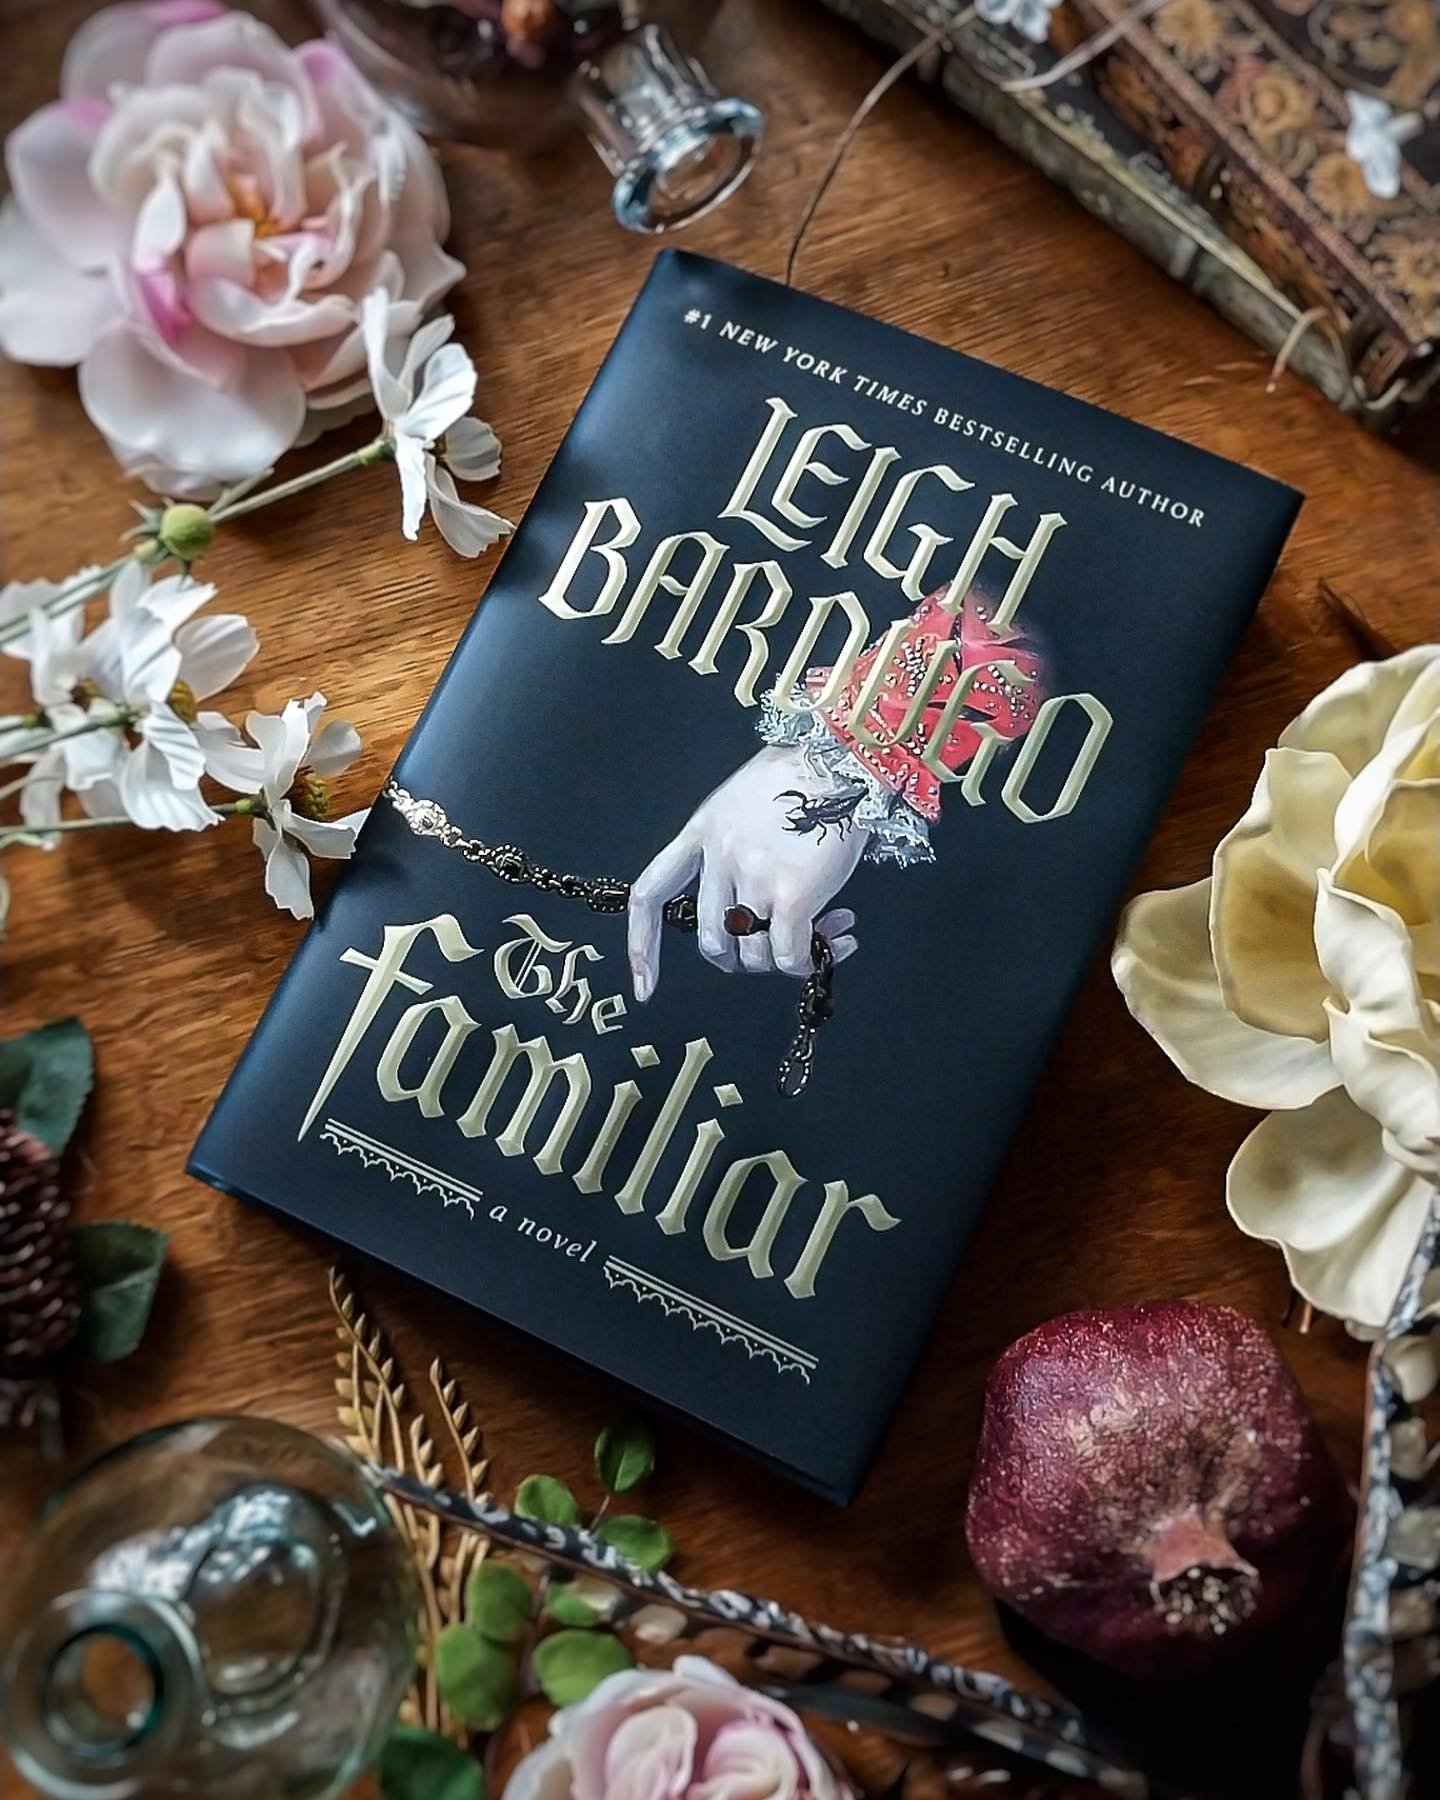 Happy Saturday! 🫶🏼 Have you read The Familiar by @lbardugo yet? I&rsquo;m finally starting it this weekend and cannot wait to enter into this fantastic world and its characters!

I love it when there&rsquo;s a crossover of genres and this historica